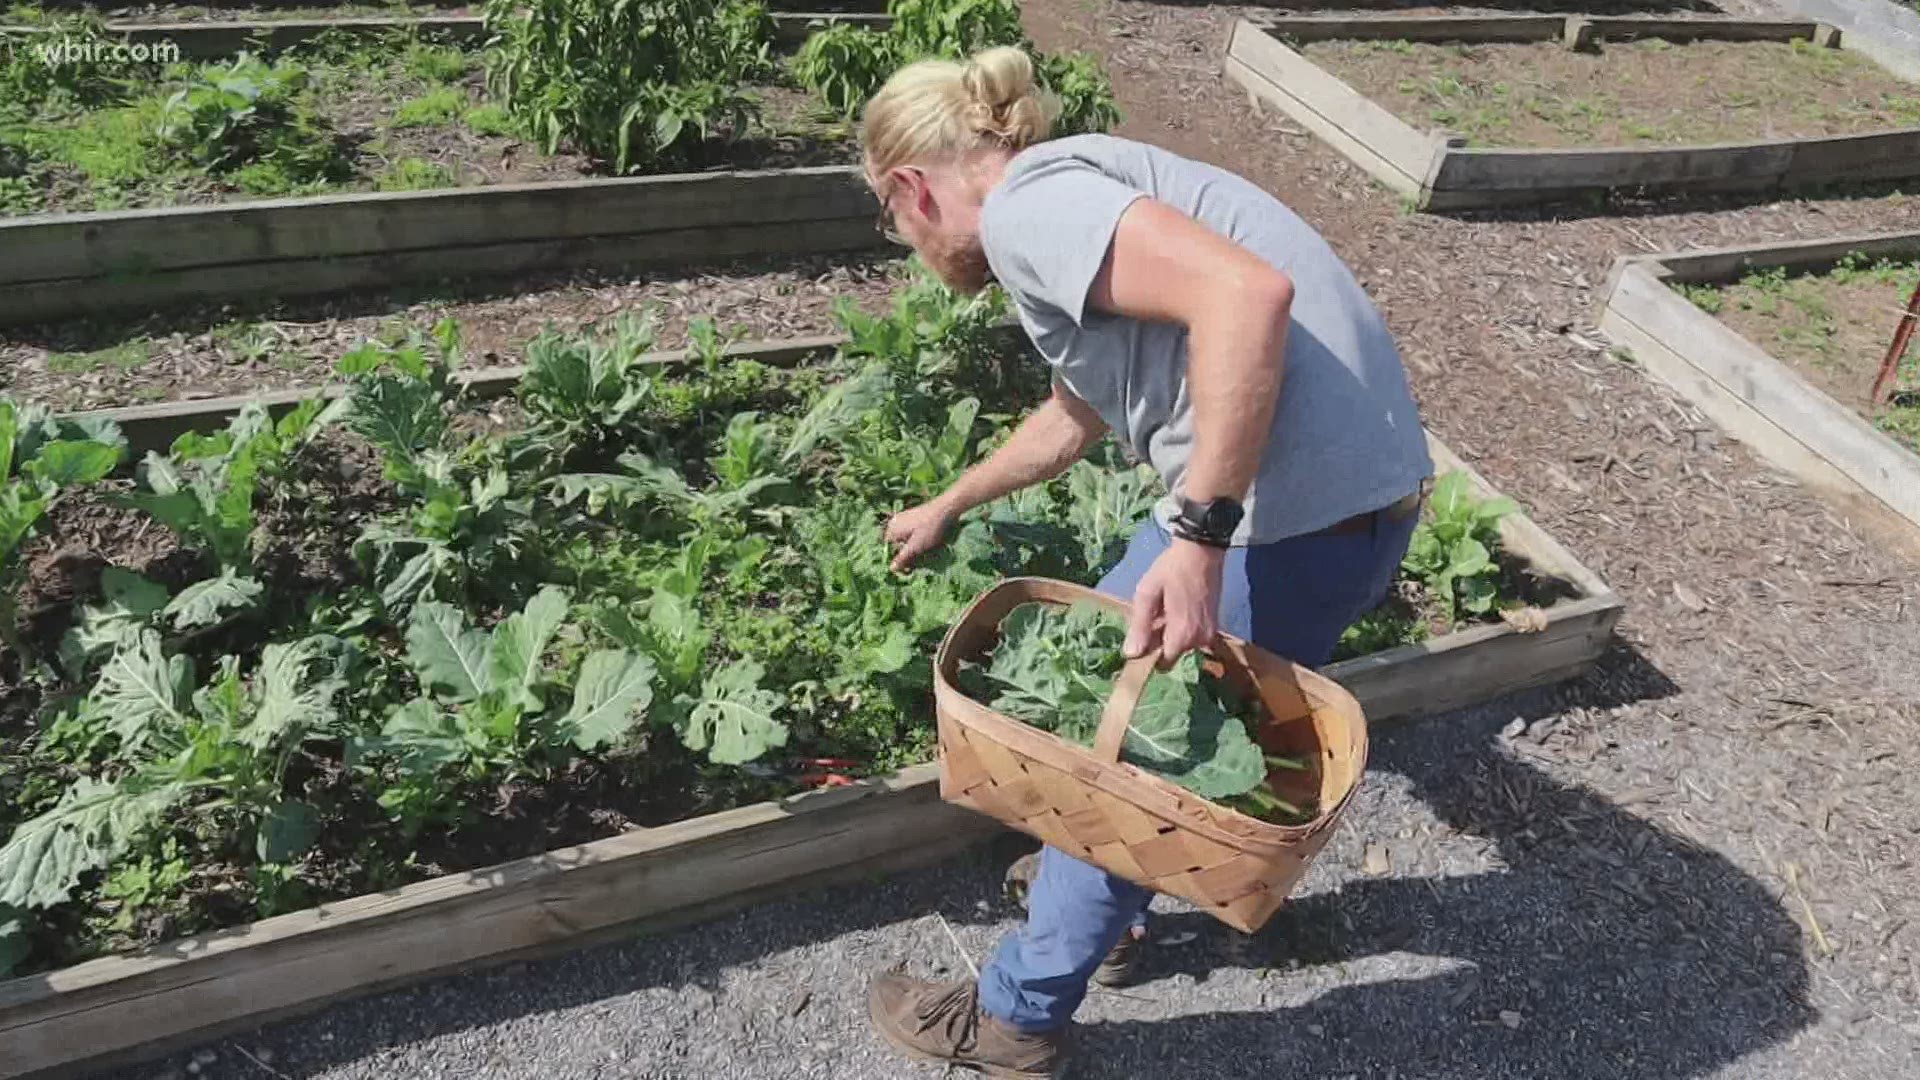 The Knoxville Botanical Garden and Arboretum decided to convert educational gardens into production spaces, to help meet food insecurity issues due to COVID-19.